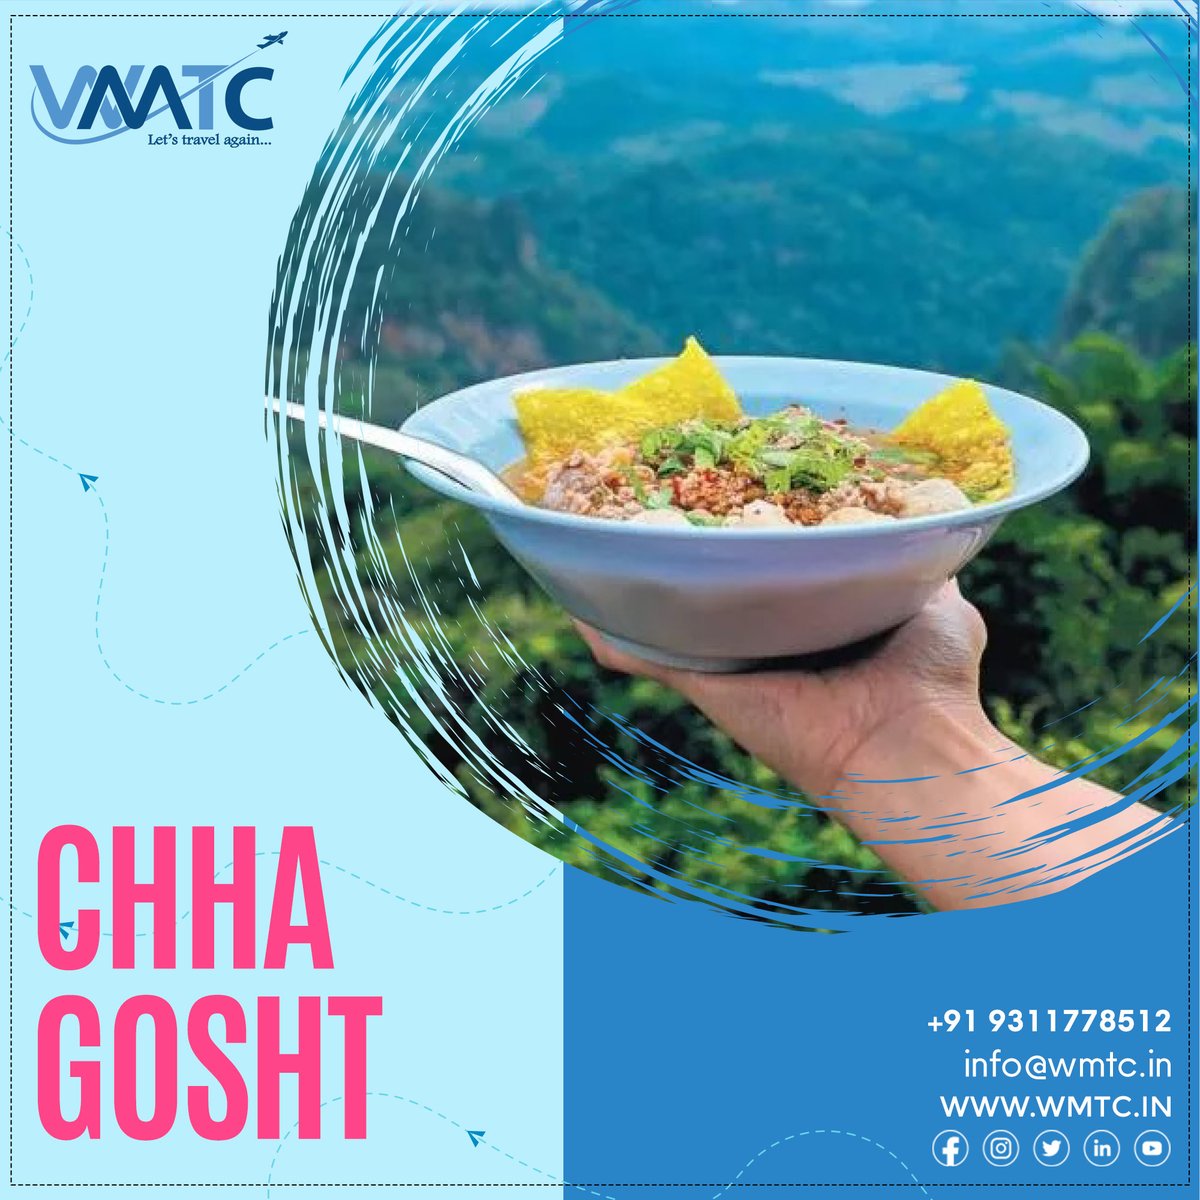 'Exploring the Flavors of Himachal Pradesh: Indulge in These Must-Try Local Delicacies!
👉 Call us 📳 to know more: +91-93117 78512 / +91-9711990625 
#food #vocal4local #localfood #MICETourism #travel #exploreindia #explore #beach #beachlife #vacation  #travel #culturalexperience